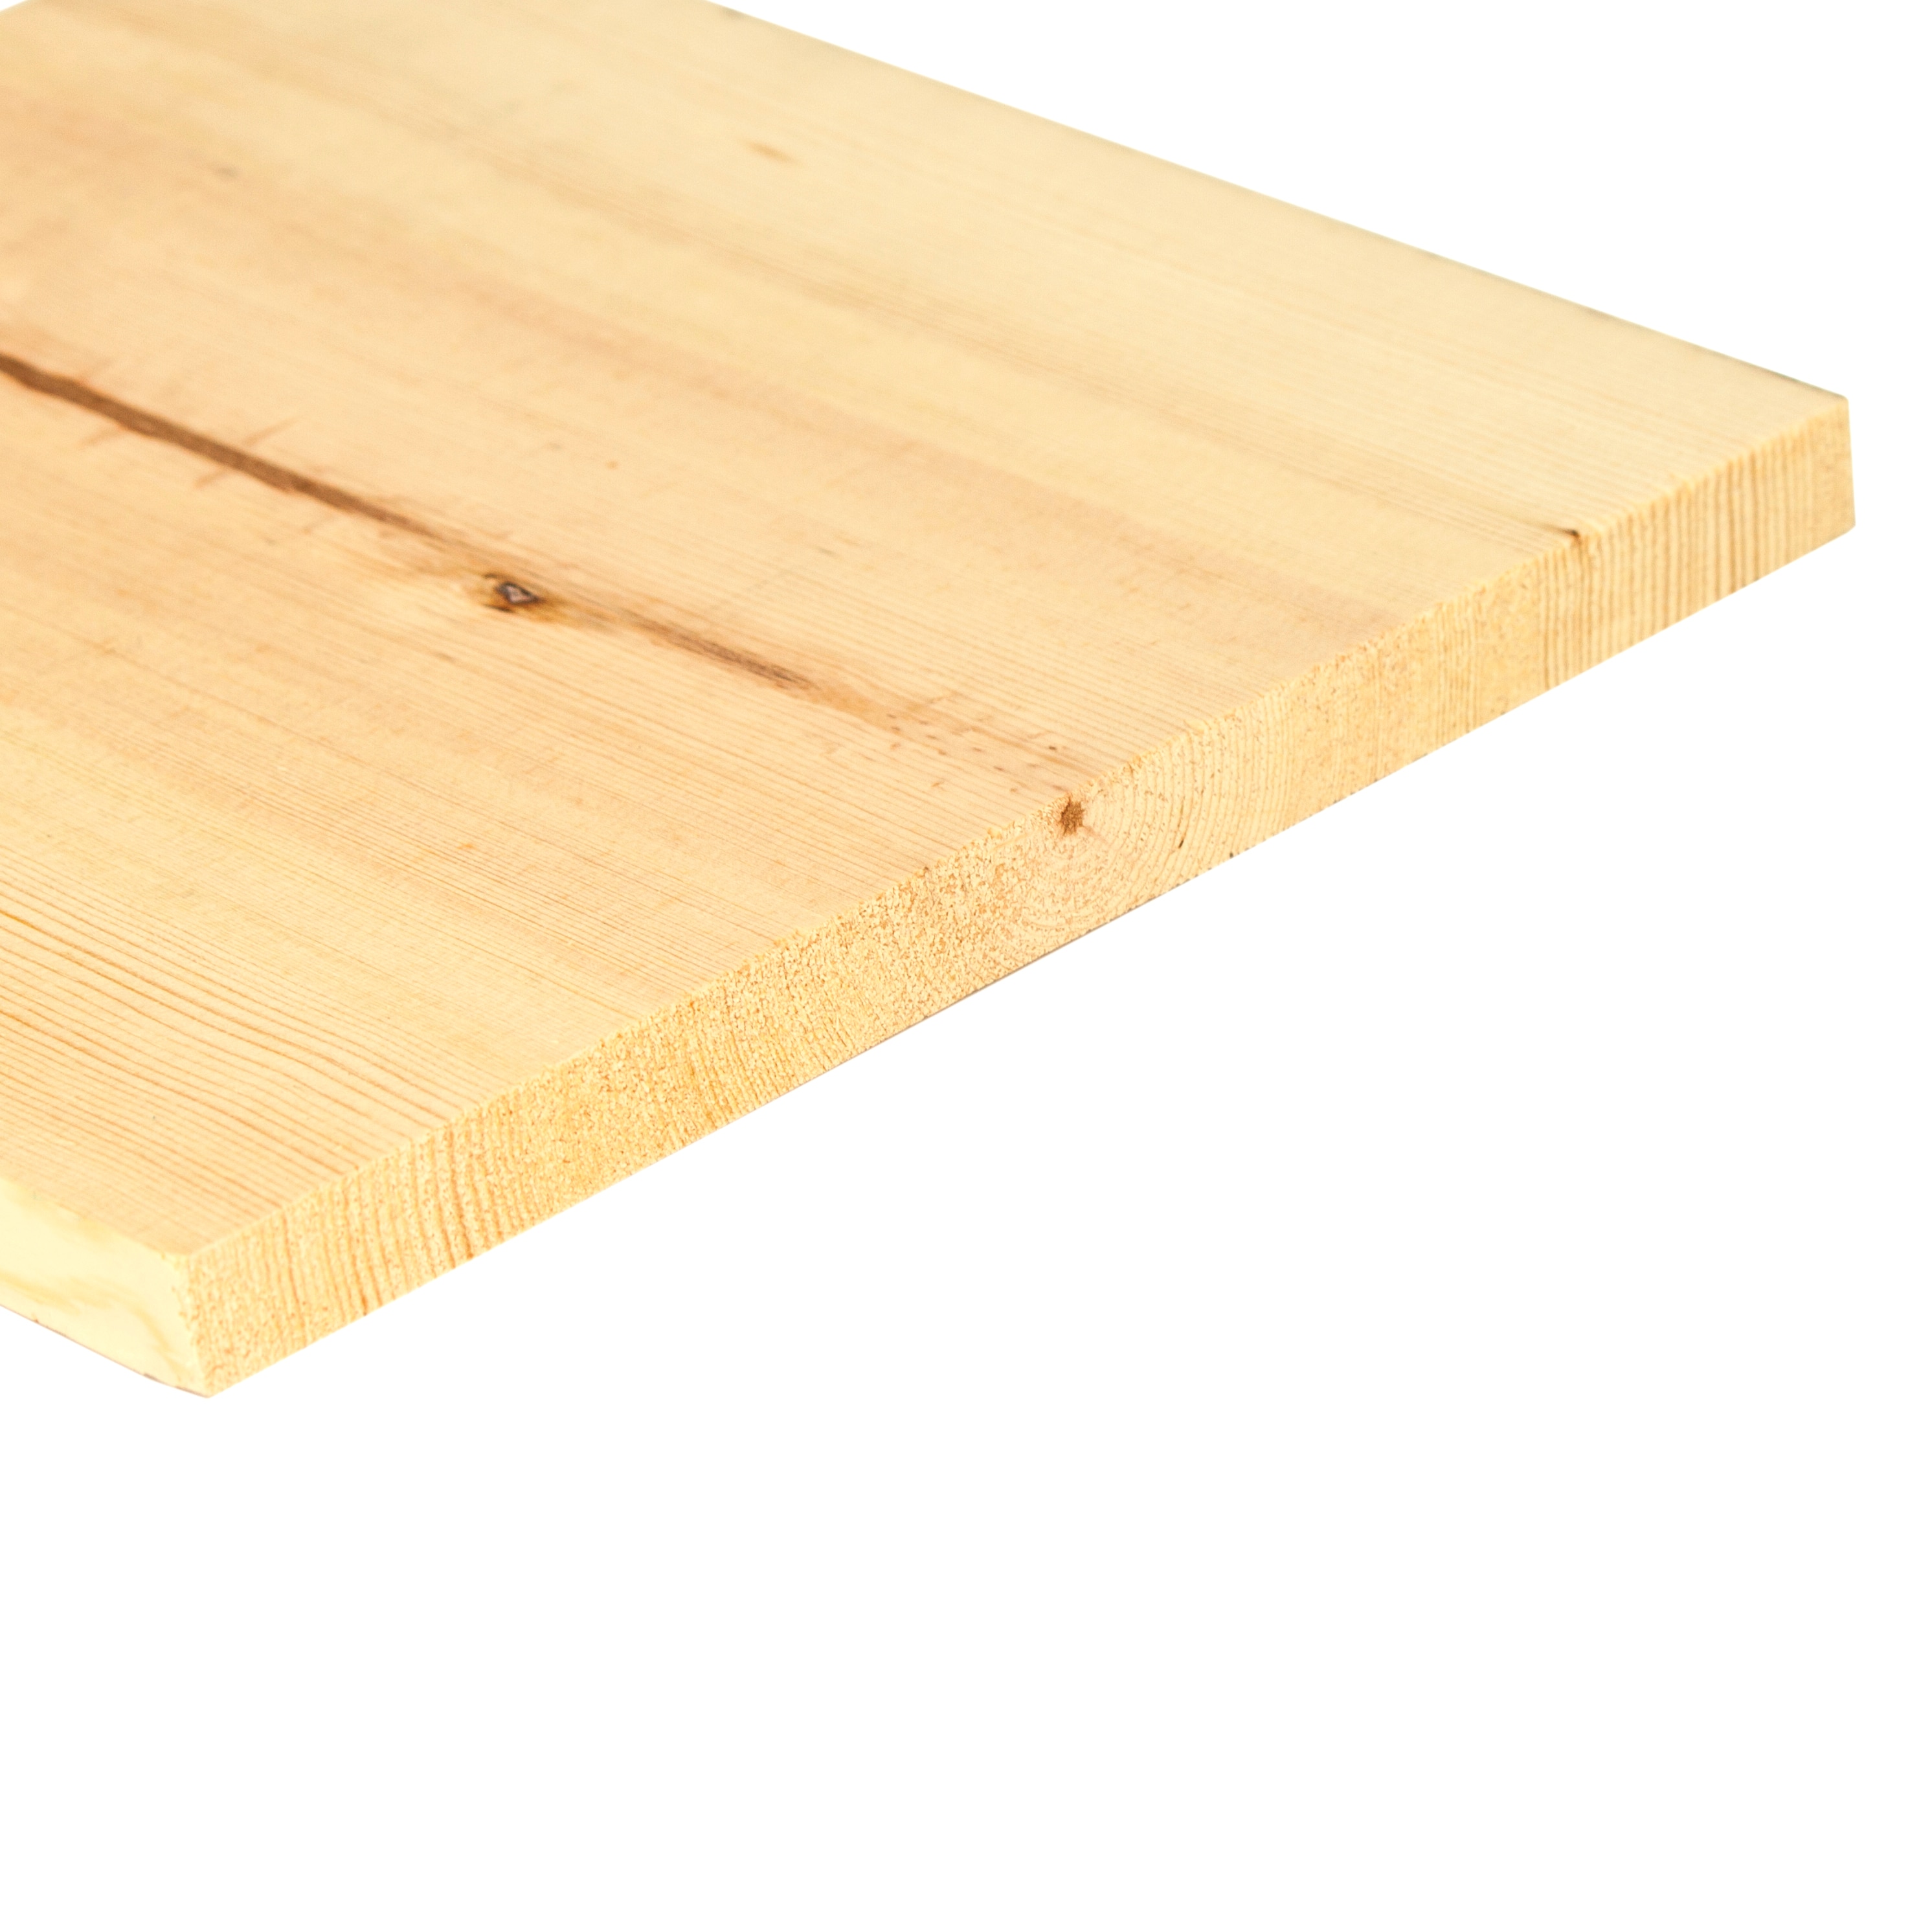 Square Edge Solid Wood DIY Plank Board 2.25 inches Thick